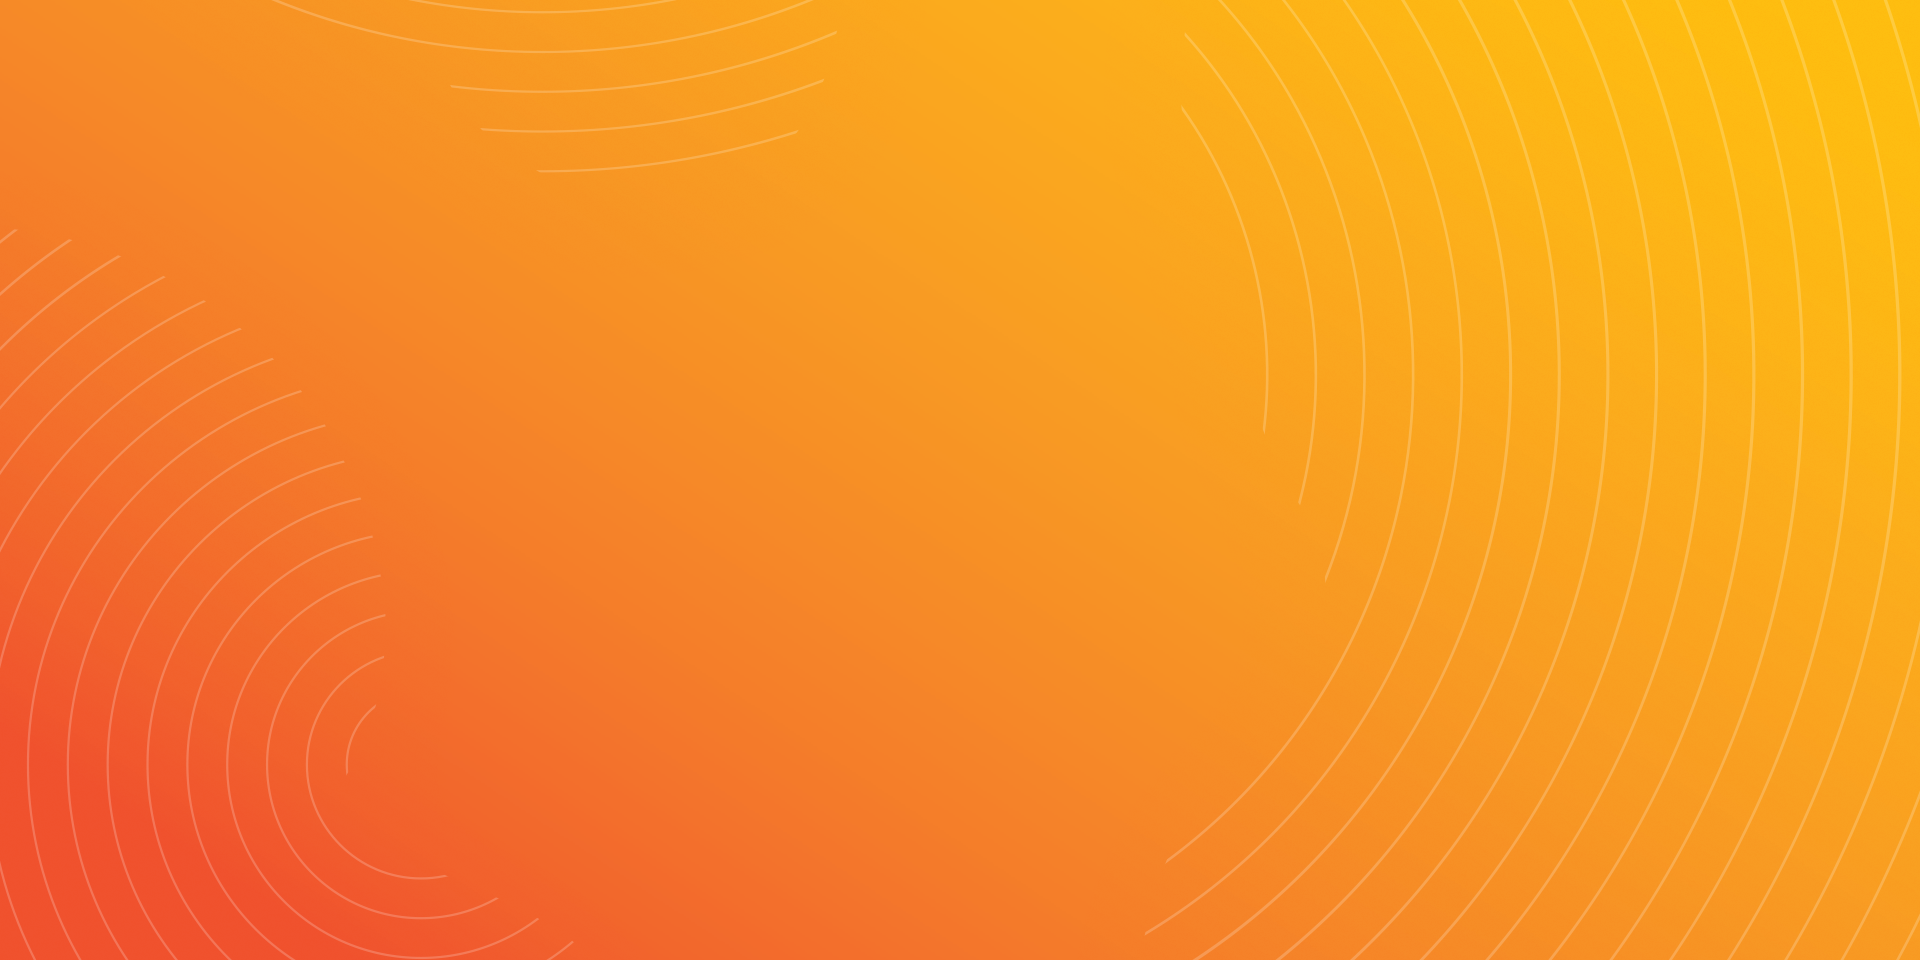 A graphic showing several faint circular lines on an orange background.